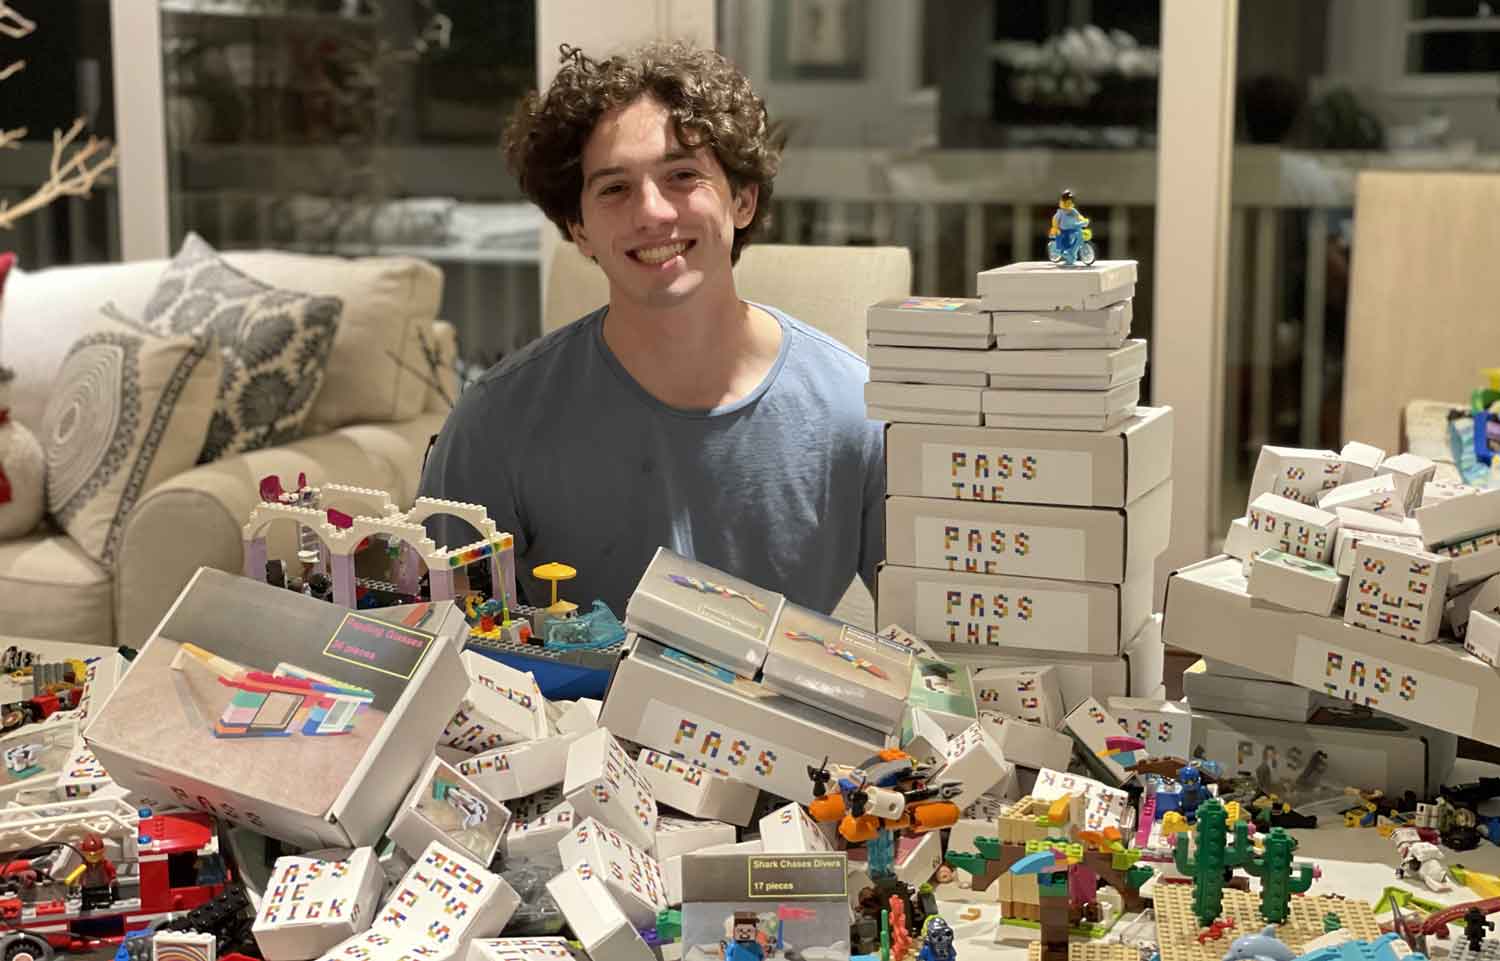 A teen smiles behind a table with many LEGO bricks and white boxes labeled Pass the Bricks.